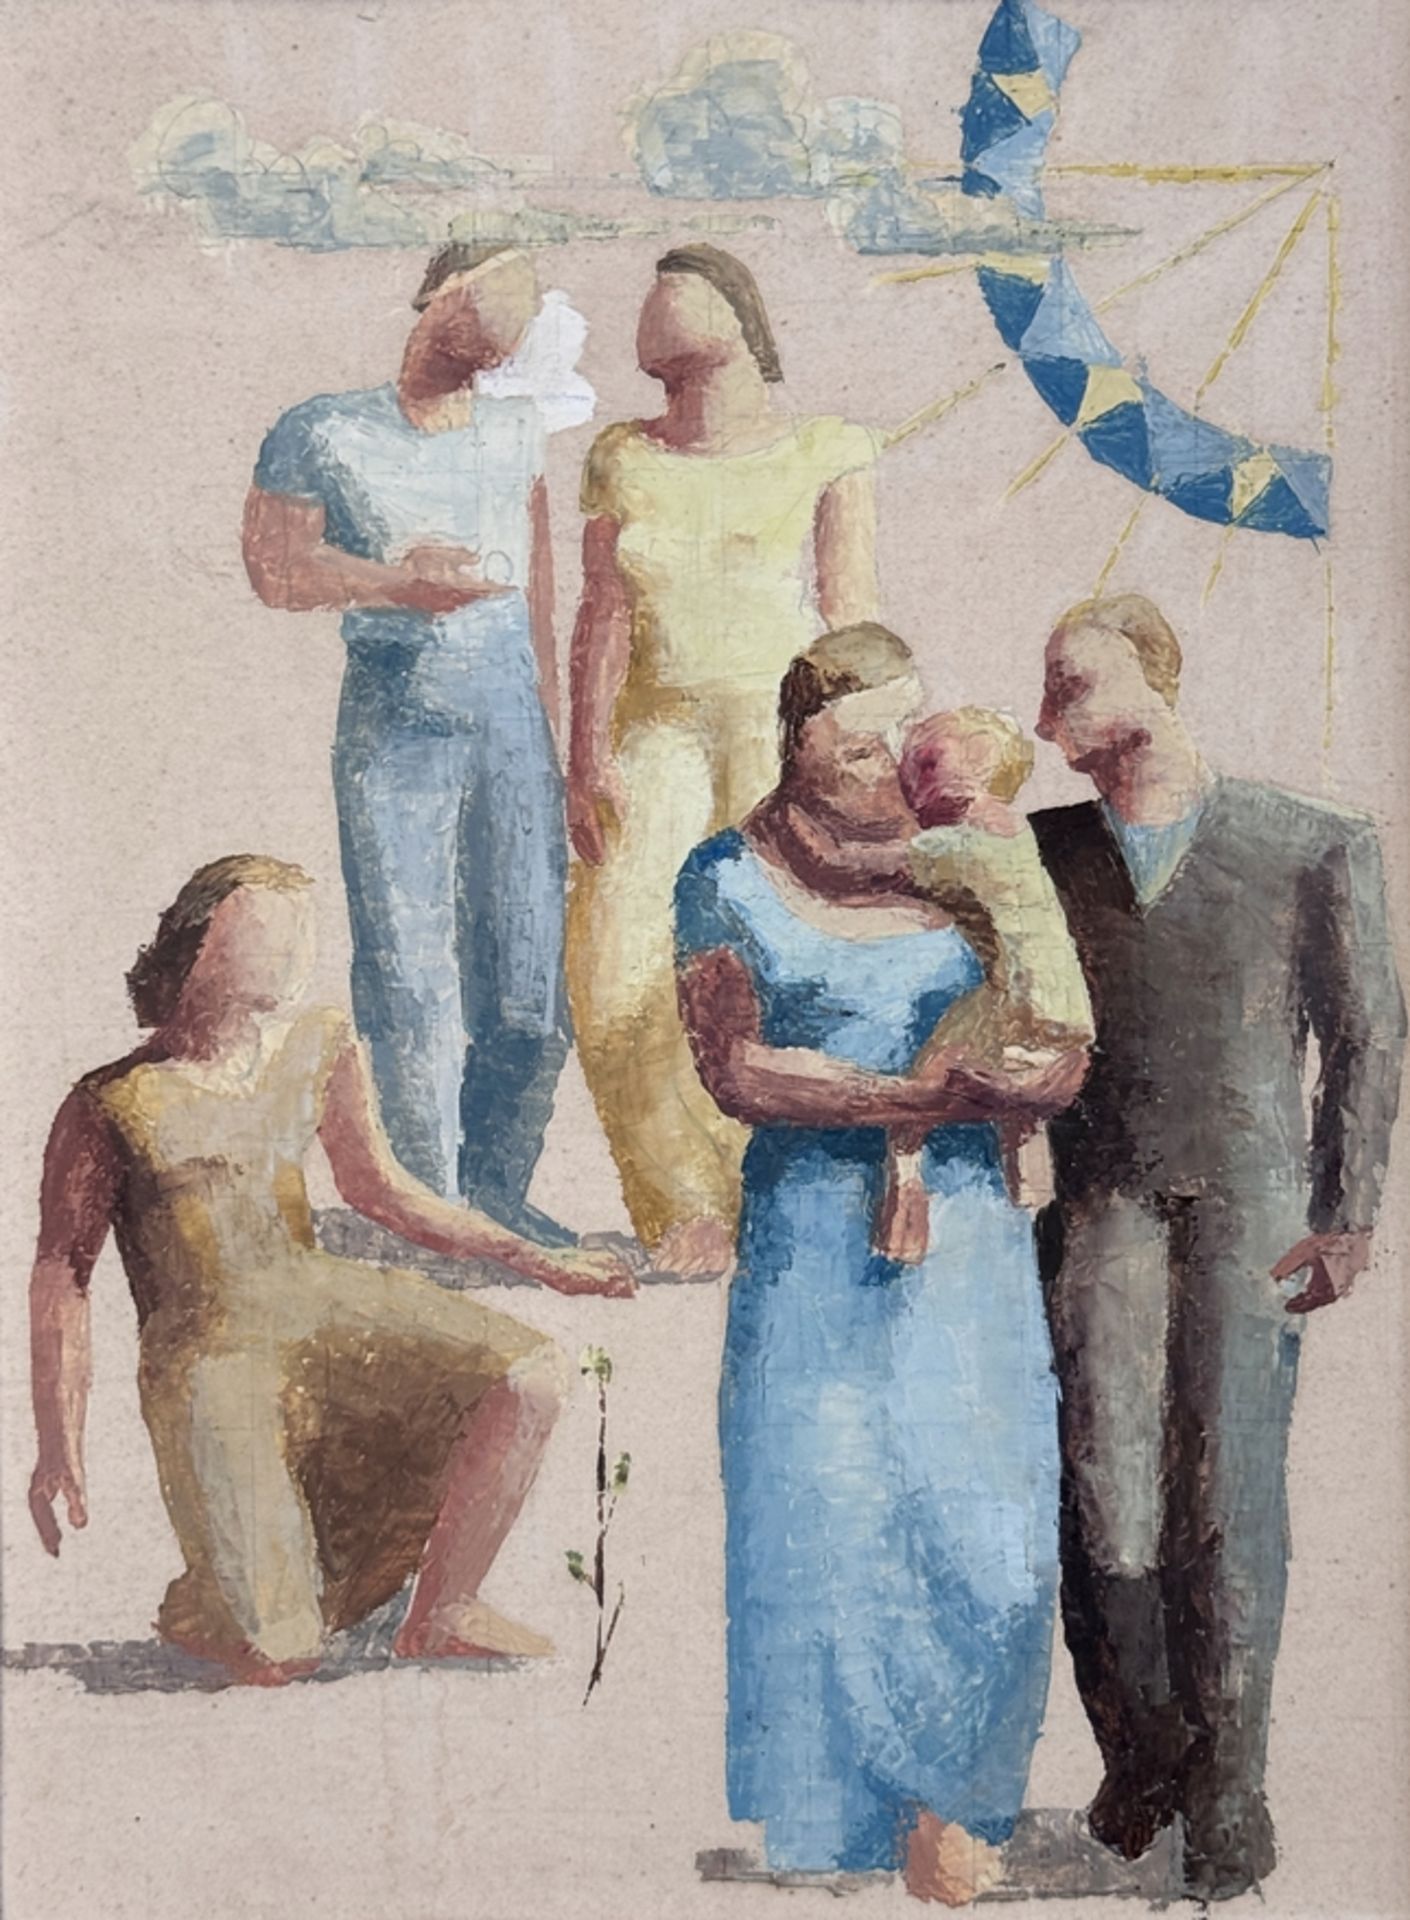 Frey, Hans Conrad (1877 Wald - 1935 Kilchberg) attributed to, "Studies" with people, oil on paper b